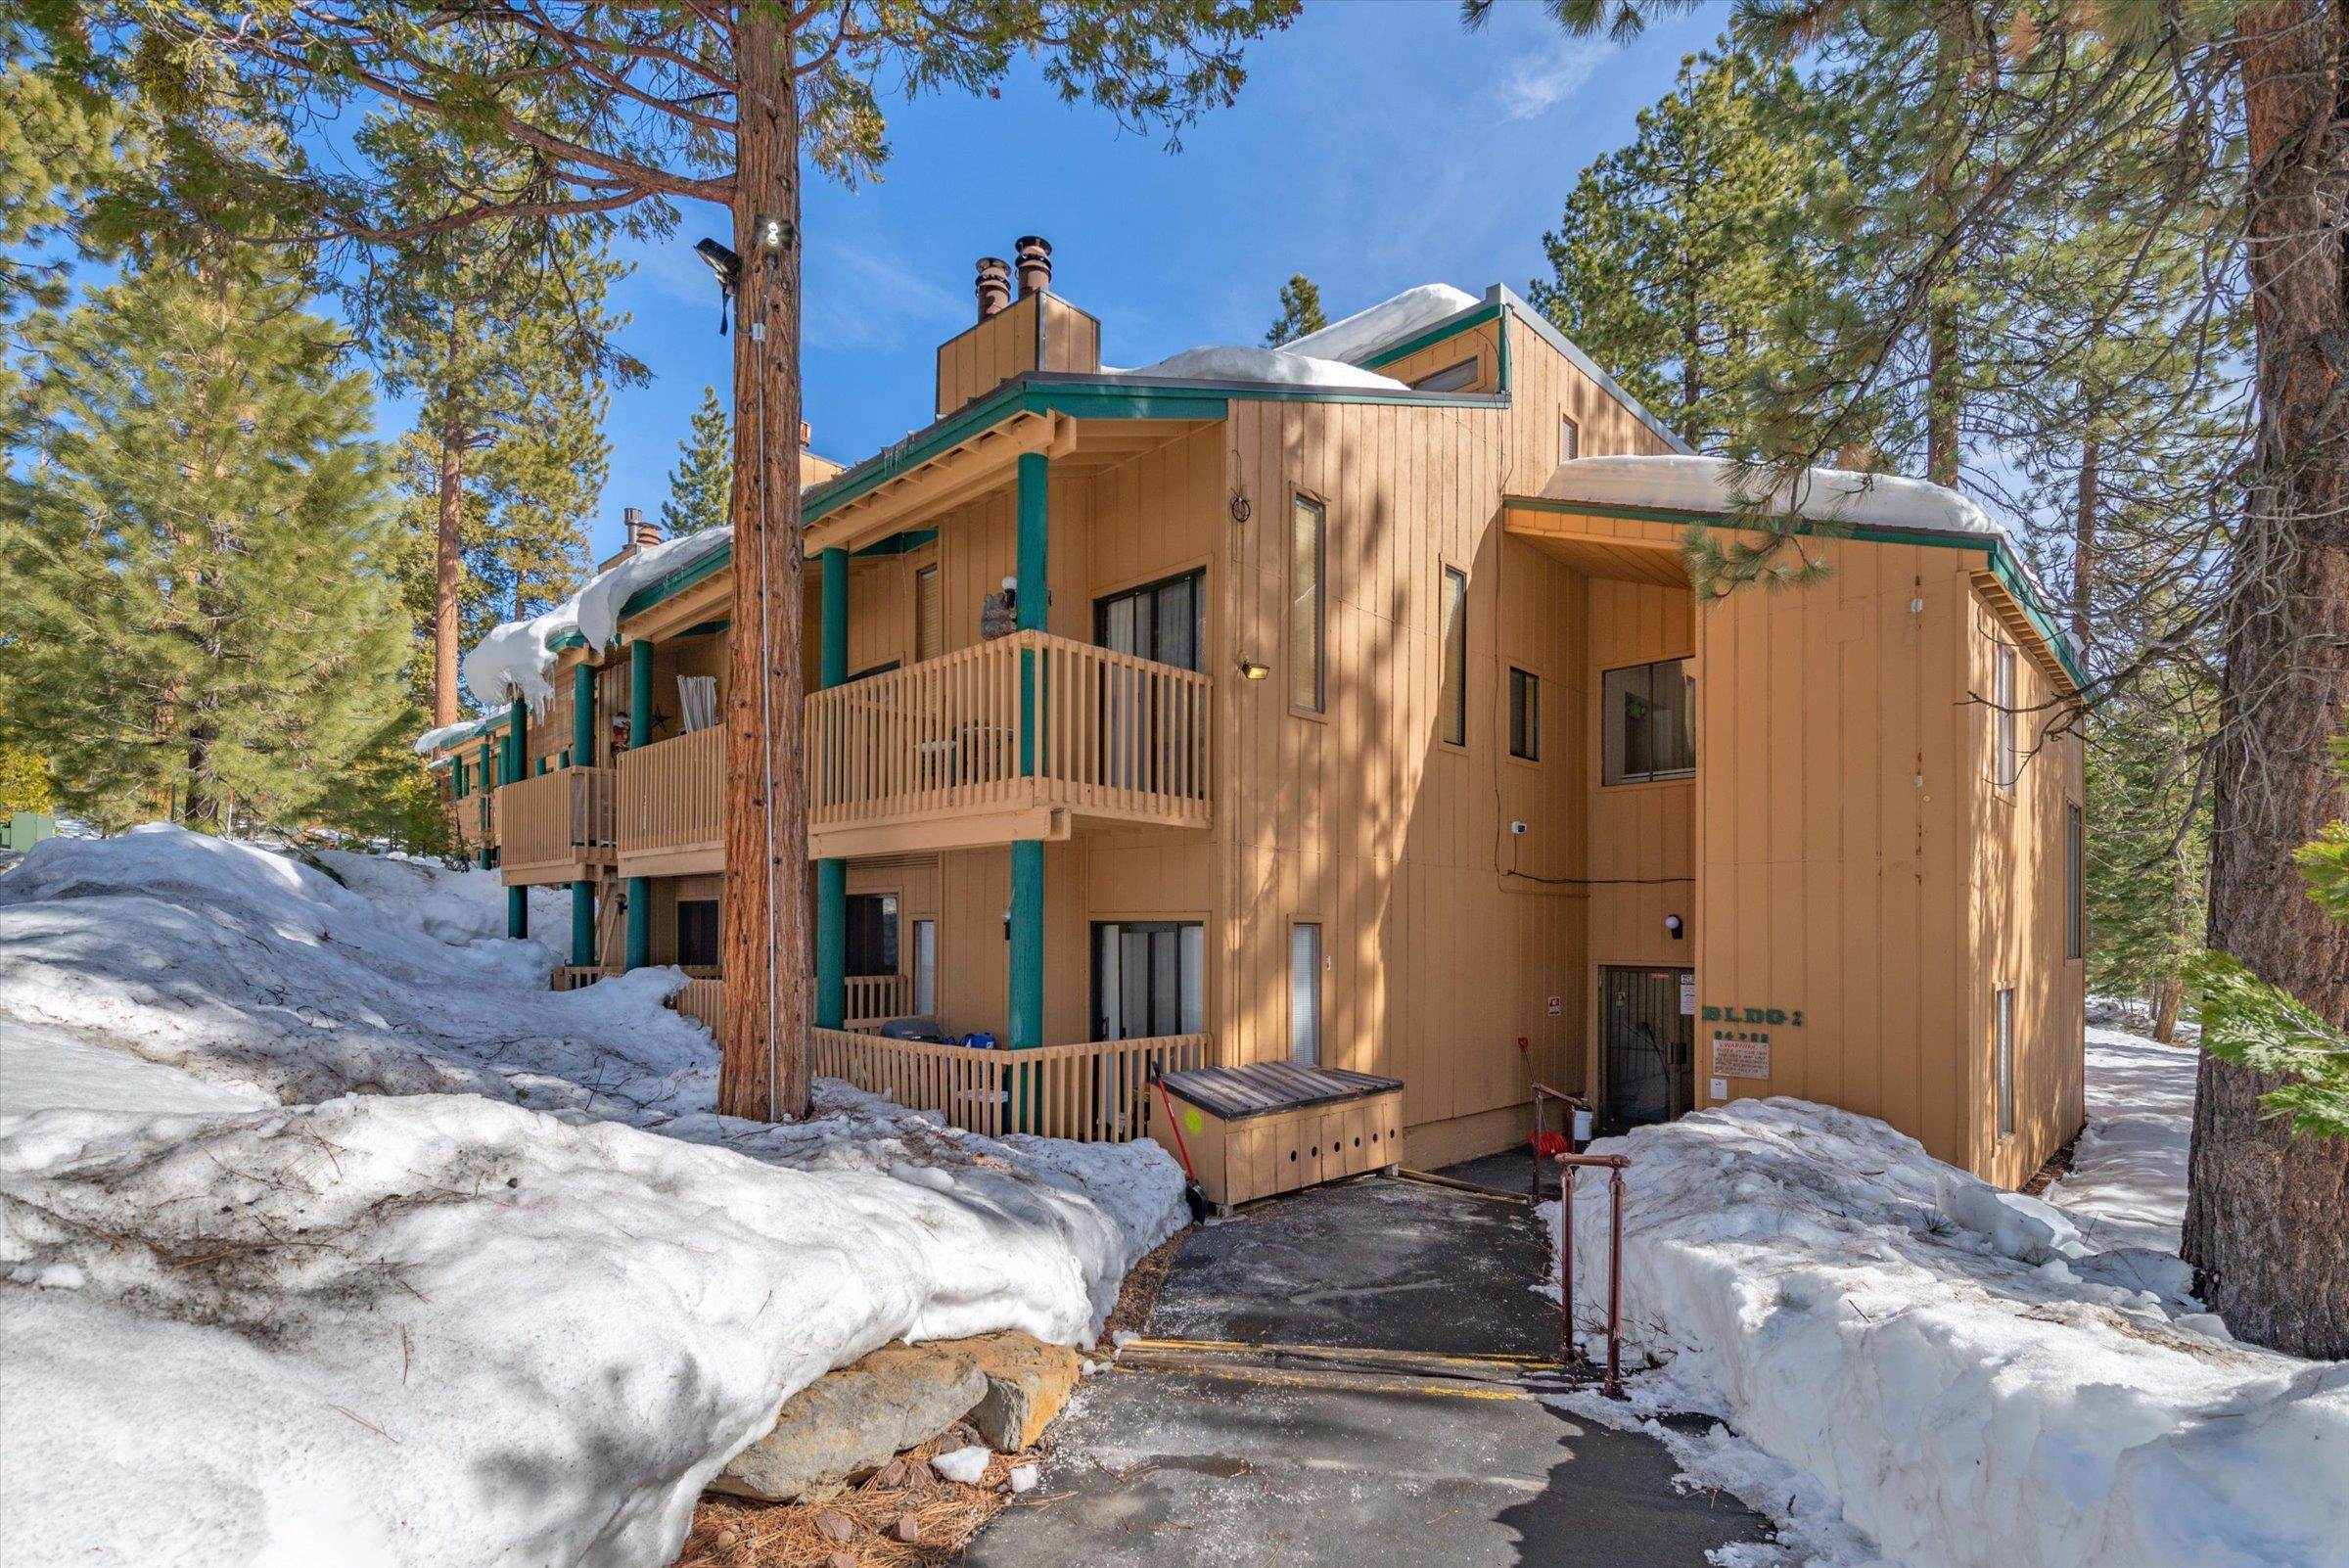 JUST REDUCED!!! Excellent Opportunity to own in the highly sought-after Kings Run. Close to parking and forest. Quiet & peaceful  This lower level studio w/ built in bunk room makes the perfect cozy winter getaway, Tahoe home or employee housing & is close to Everything! Only 10 min to Northstar & Kings Beach & minutes to hiking, biking, skiing & snowmobiling trails, shopping and dining as well. Ski locker. There is also long term storage for RV's and snowmobiles for owners w/ acceptable permit.